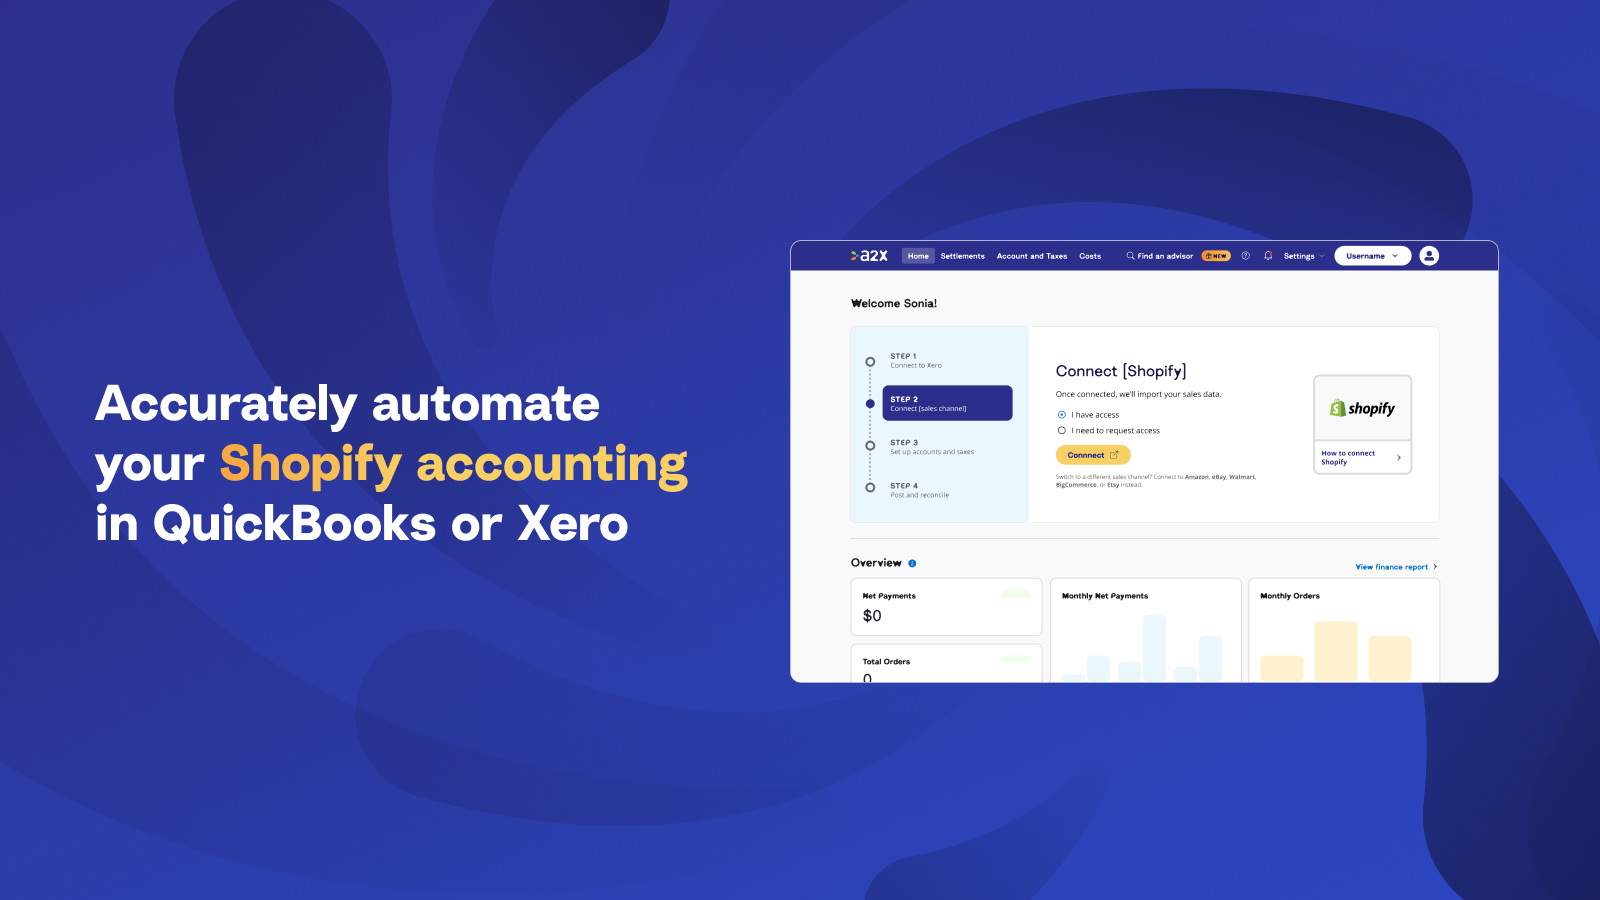 Syncs Shopify (and others) into QuickBooks, Xero, or Sage